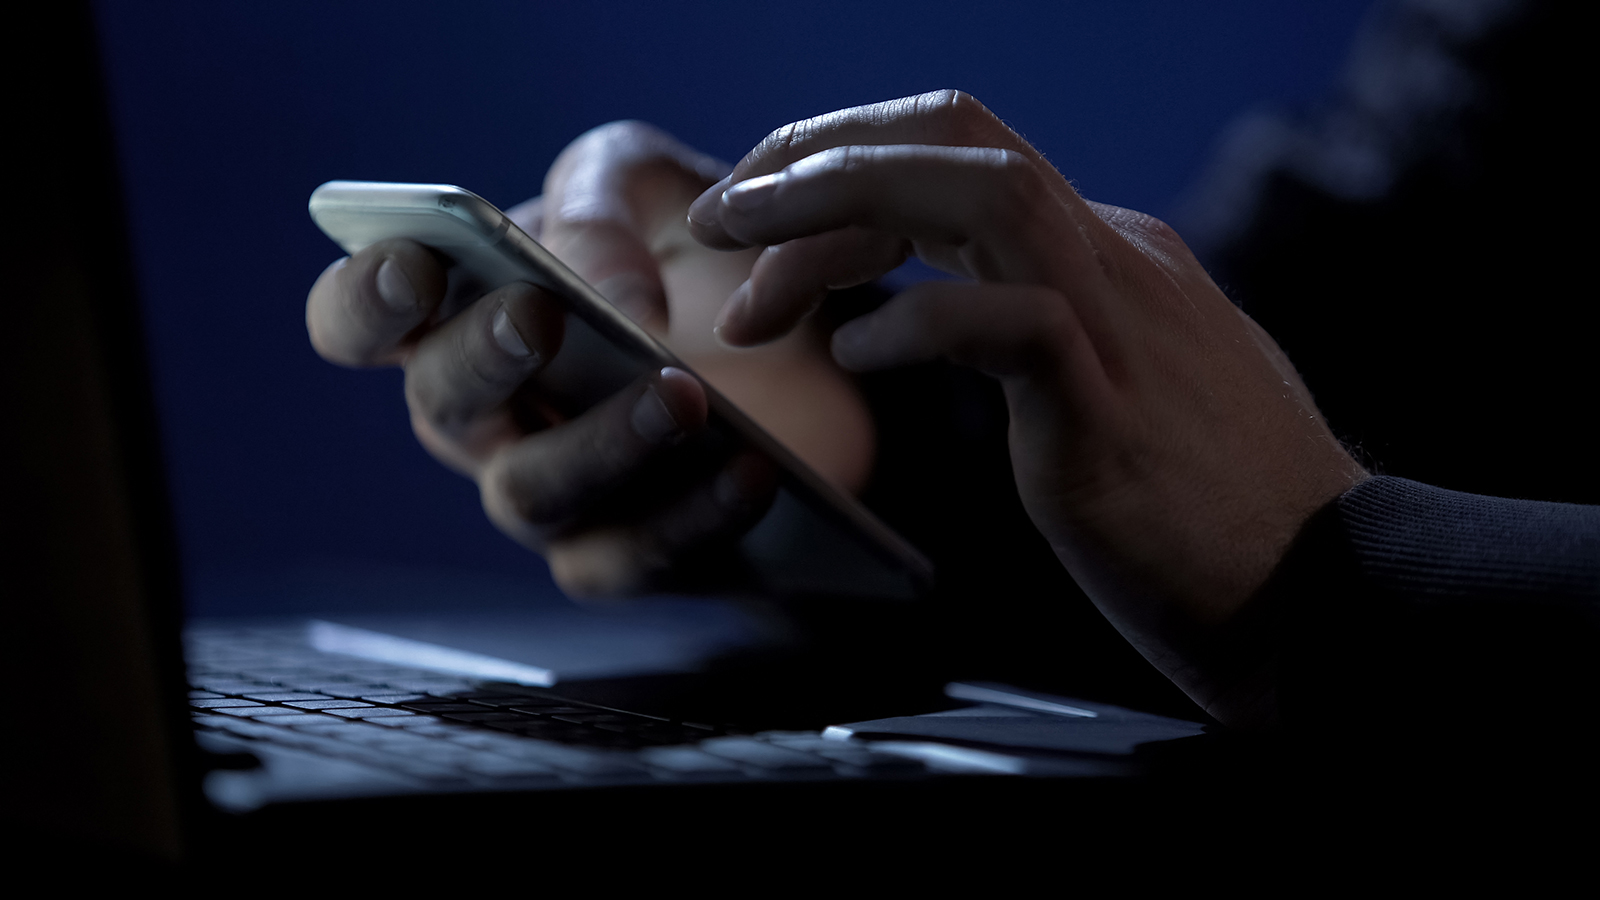 Scammer holds smartphone, cracks two-factor authentication, steals money online...